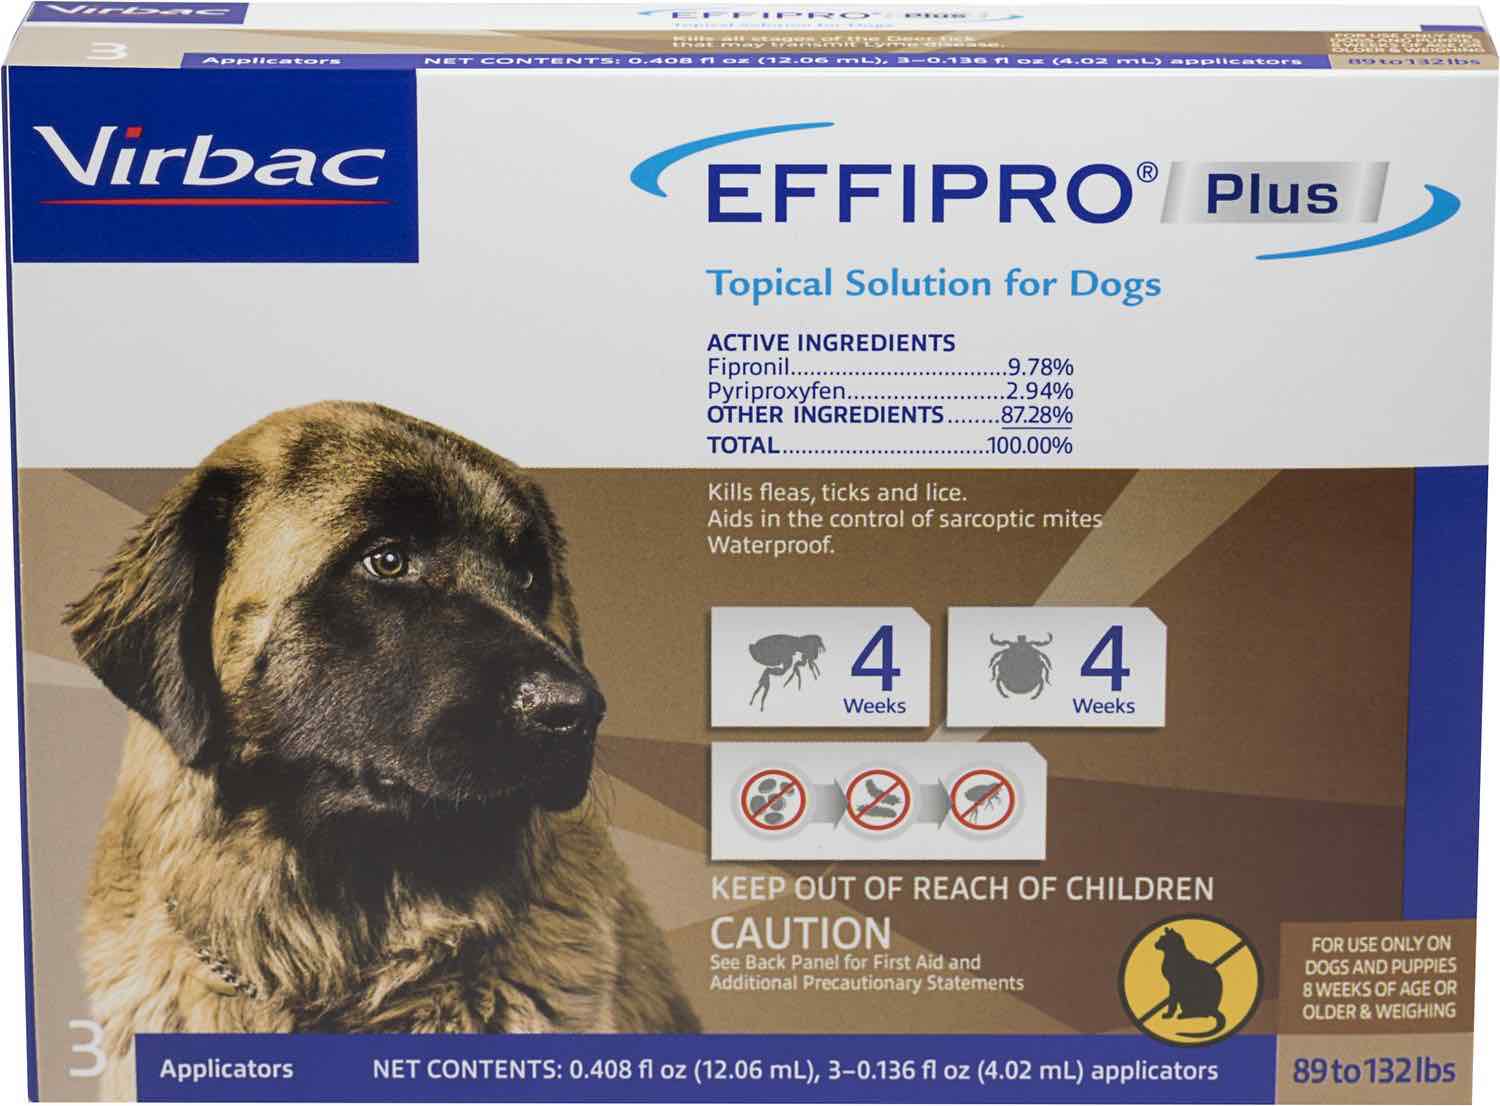 Effipro Plus for Dogs 3 applicators 89-132 lbs (Brown) 1